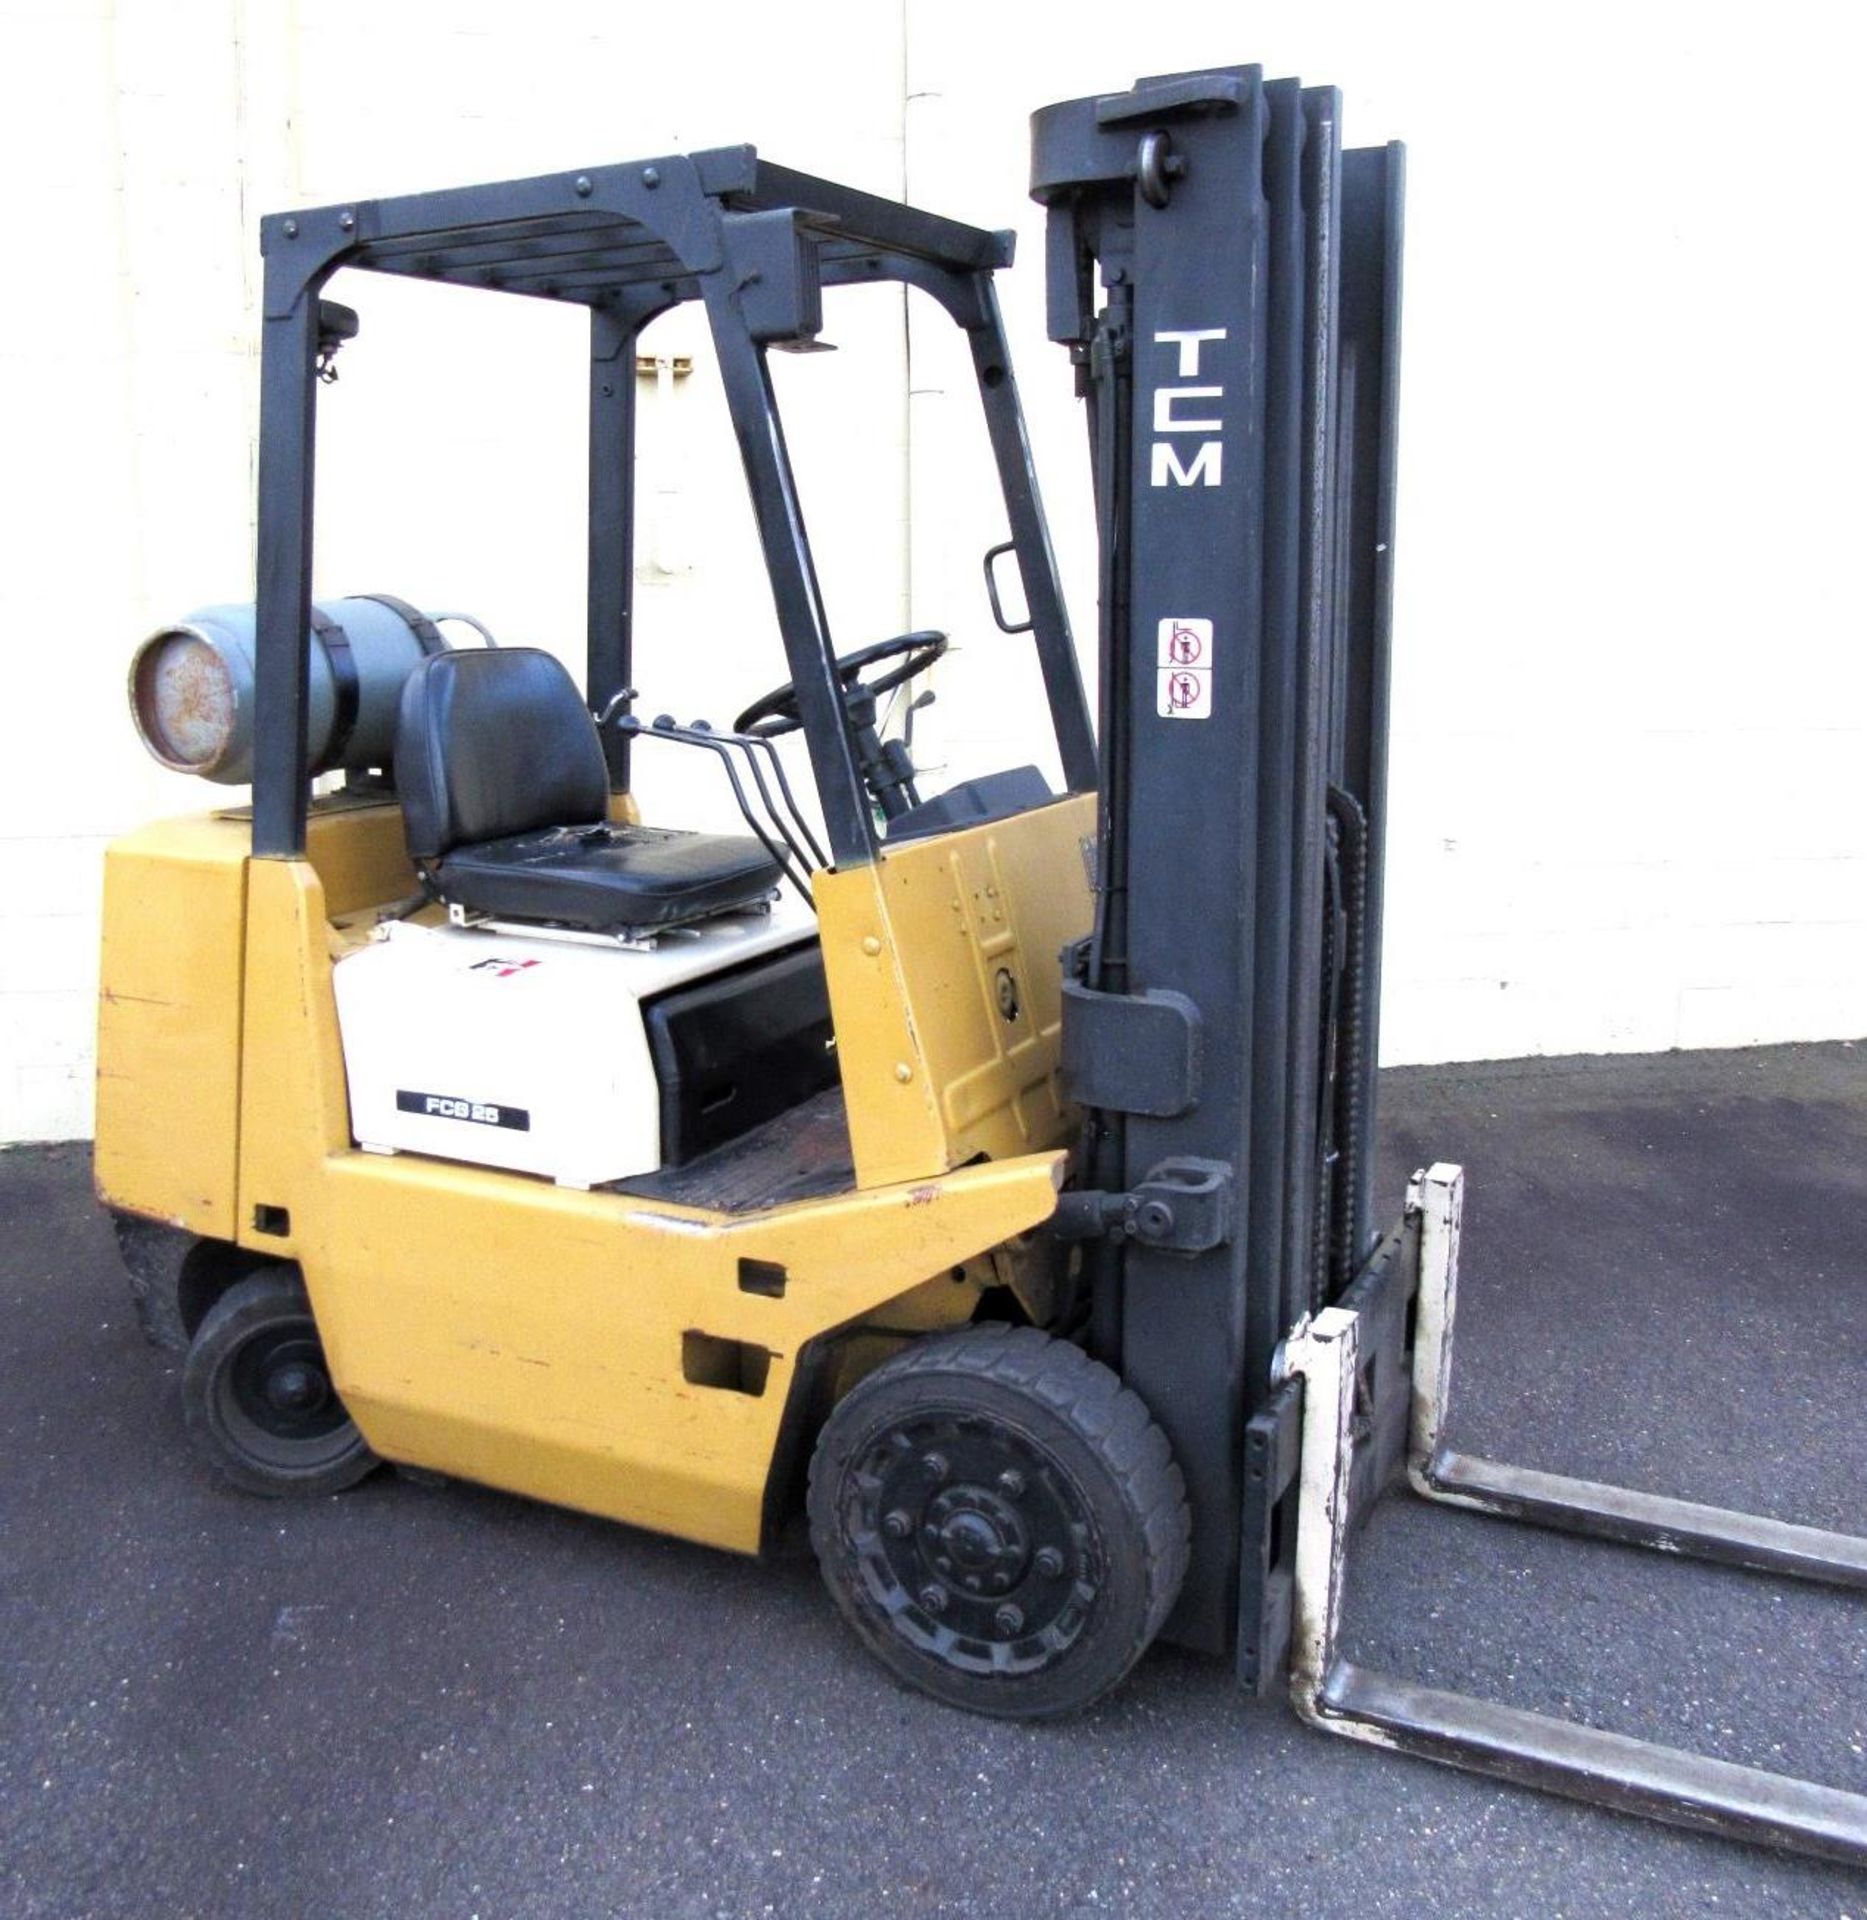 TCW Mod.FCG25N6T 4500 Lb. Forklift Truck - Image 2 of 5